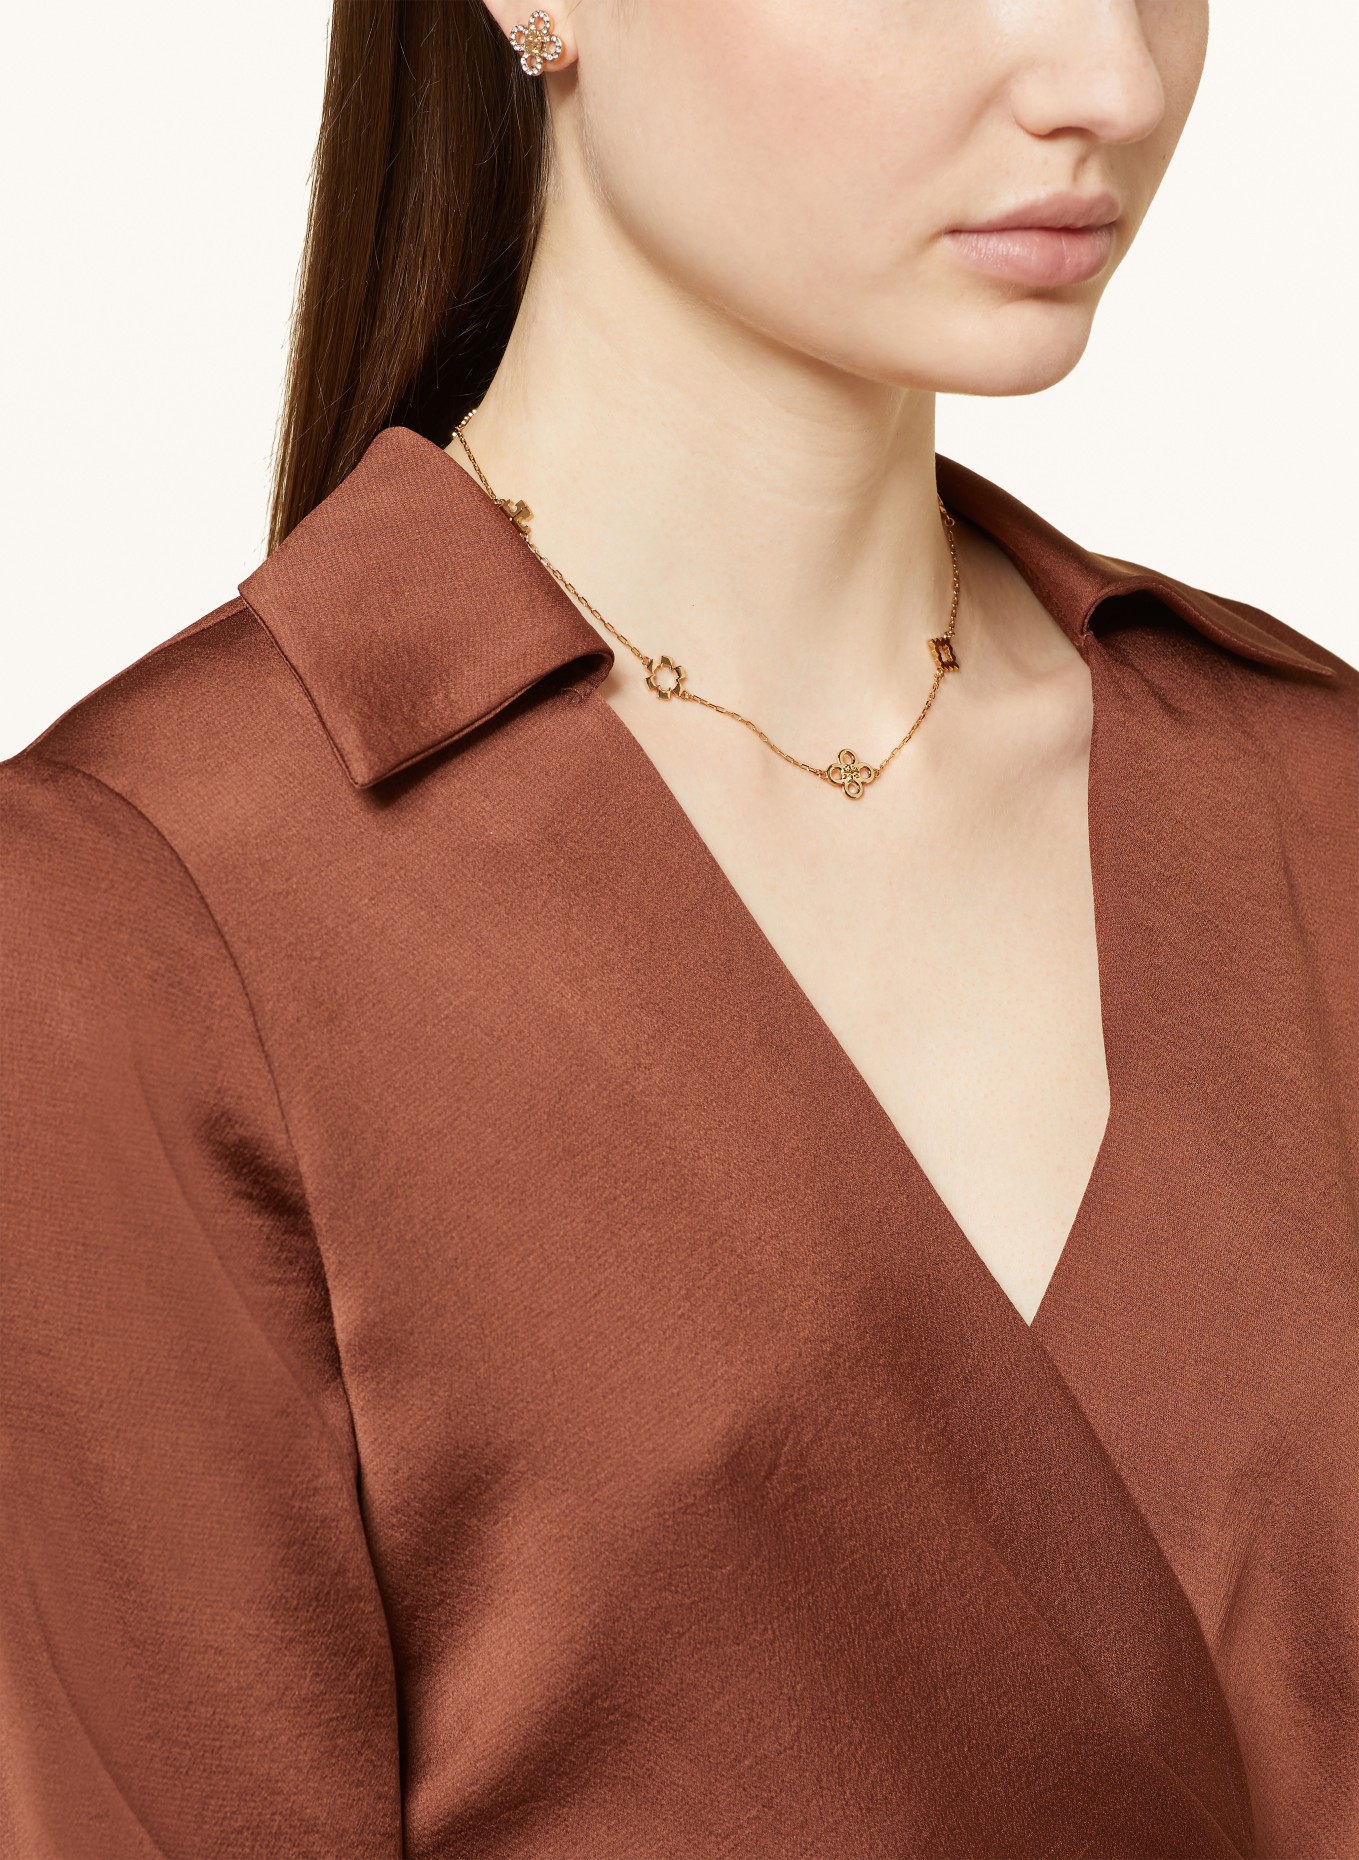 Tory Burch Kira Leather Long Necklace | The Summit